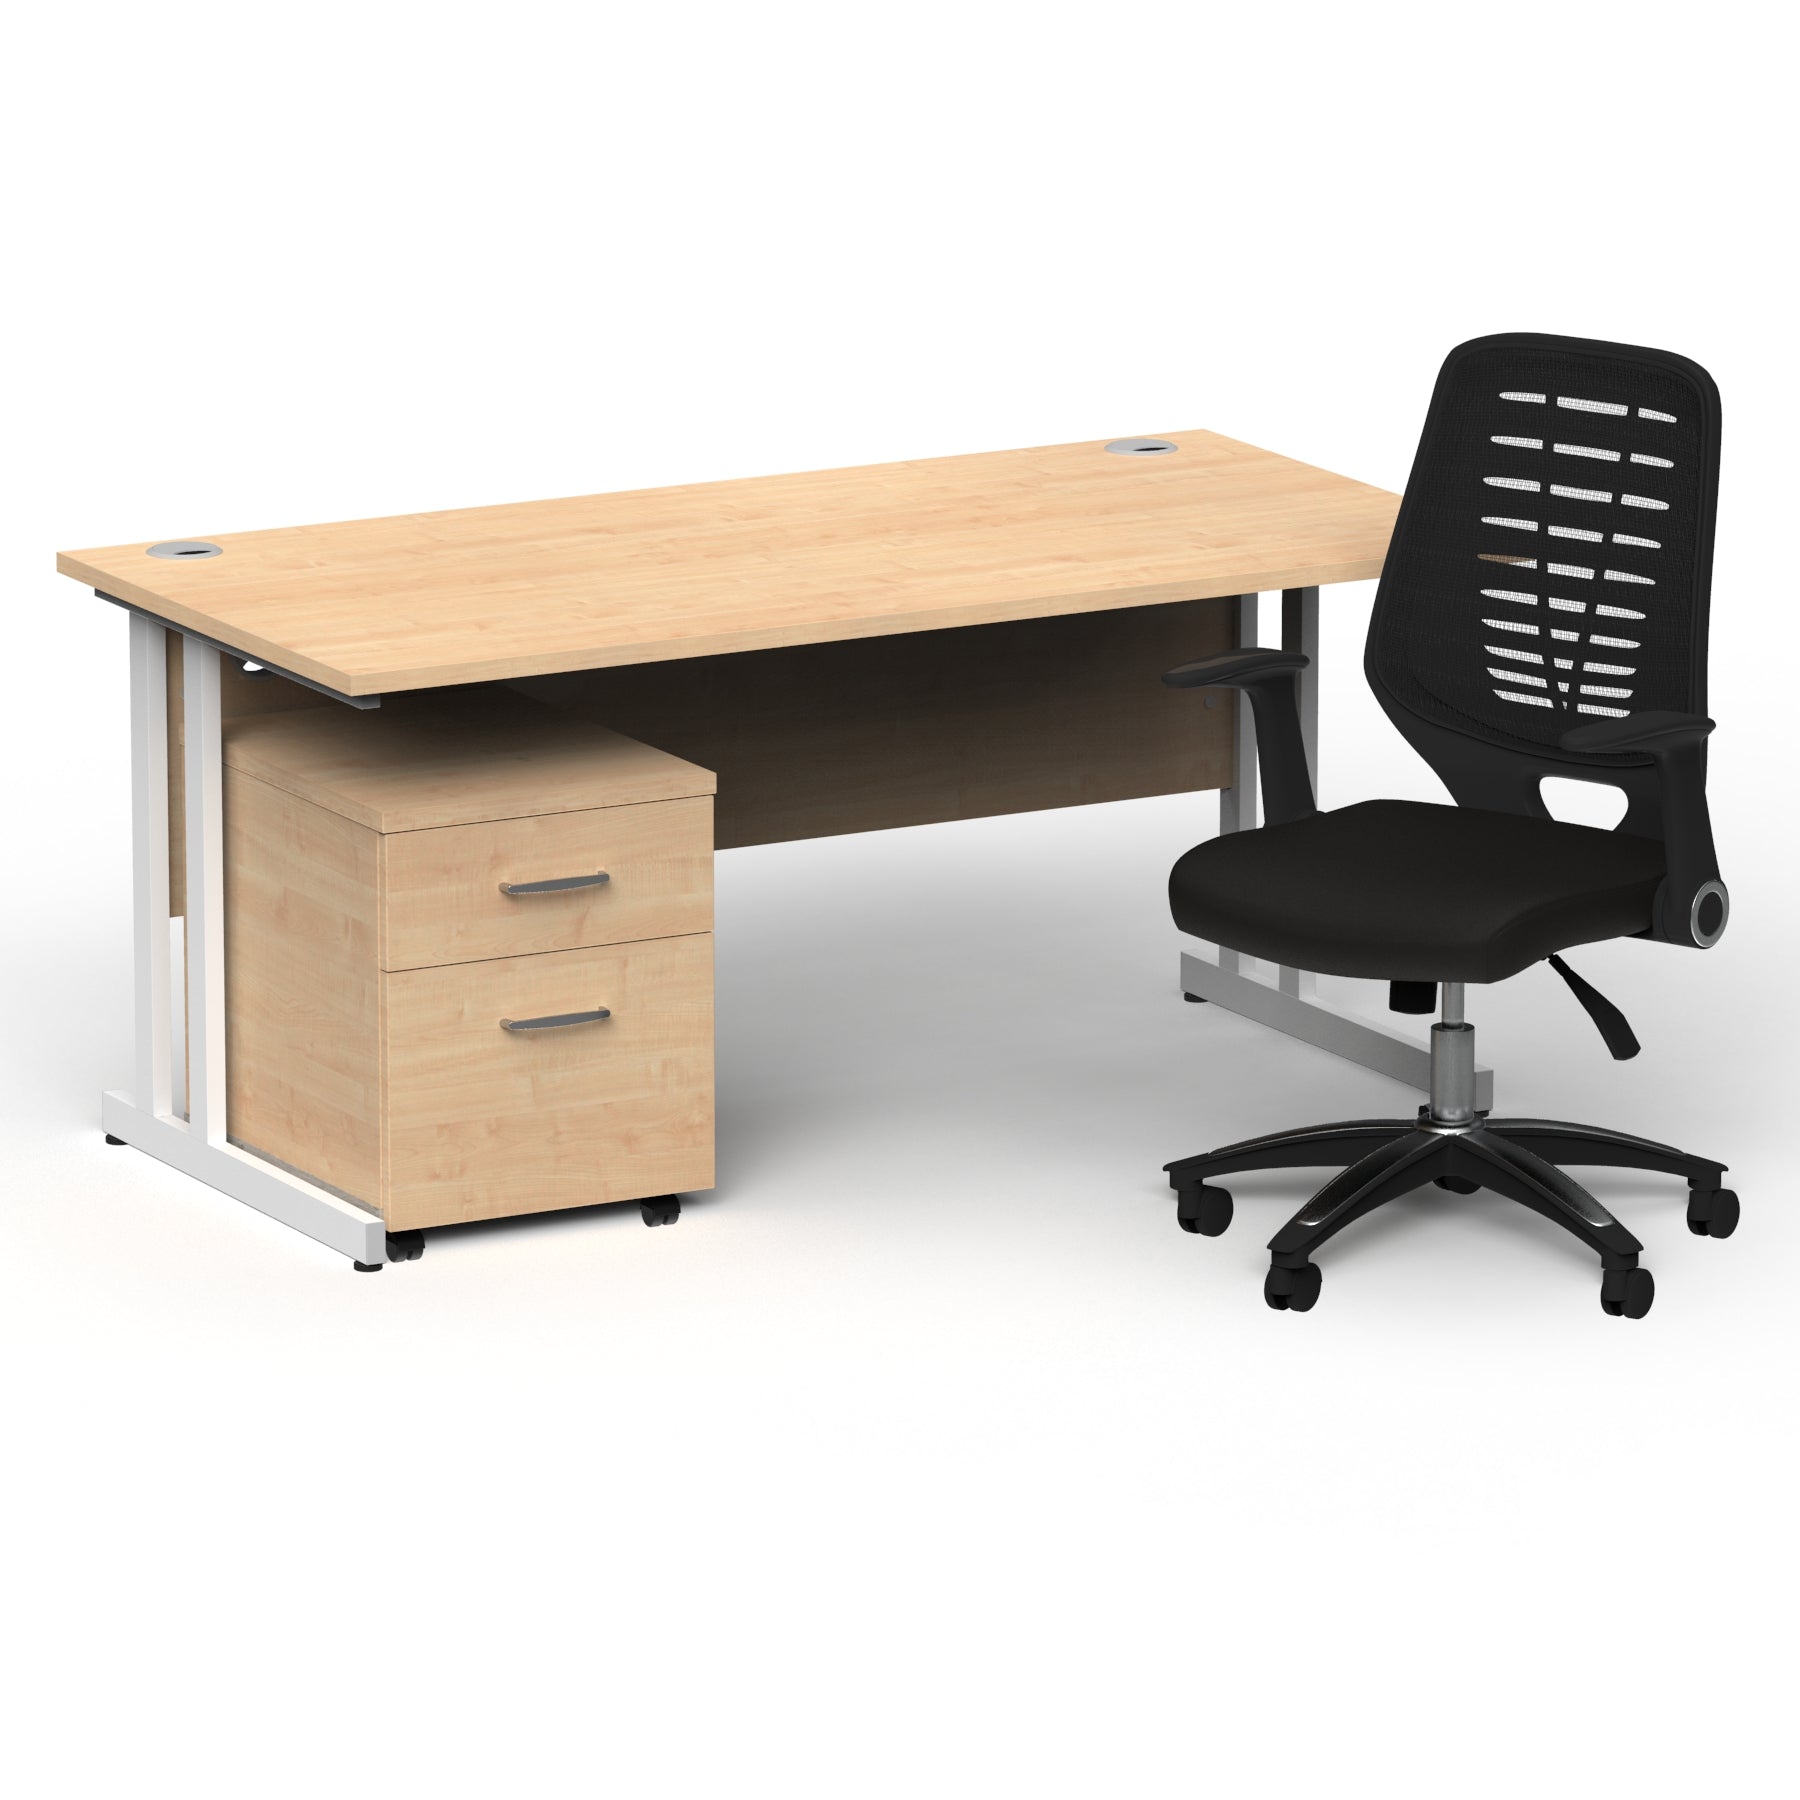 Impulse 1600mm Cantilever Straight Desk With Mobile Pedestal and Relay Black Back Operator Chair